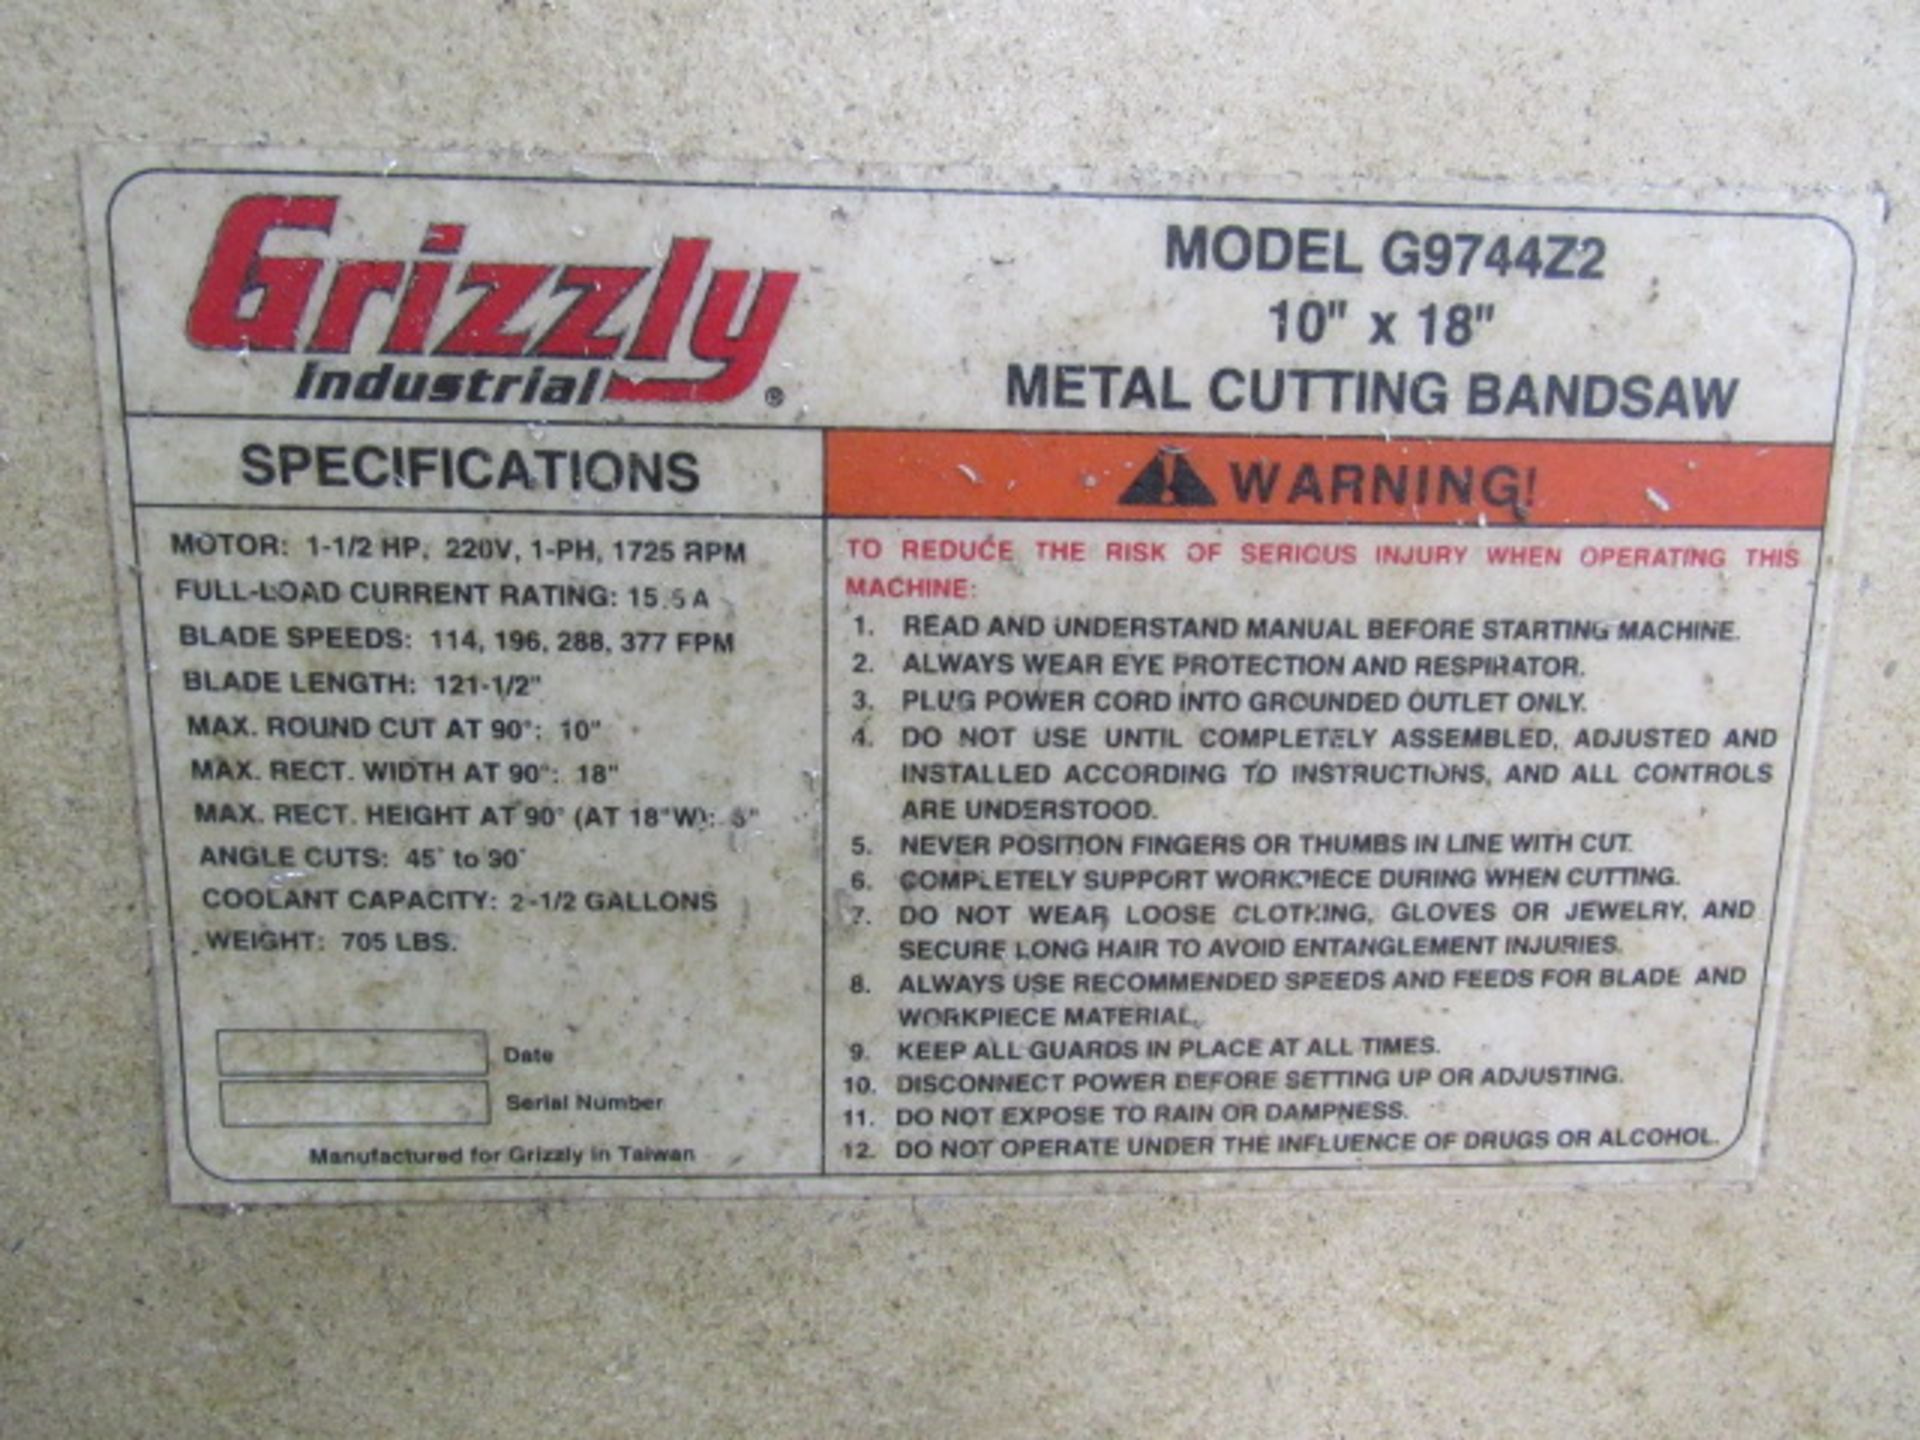 Grizzly G9744Z2 Horizontal Bandsaw - Image 5 of 9